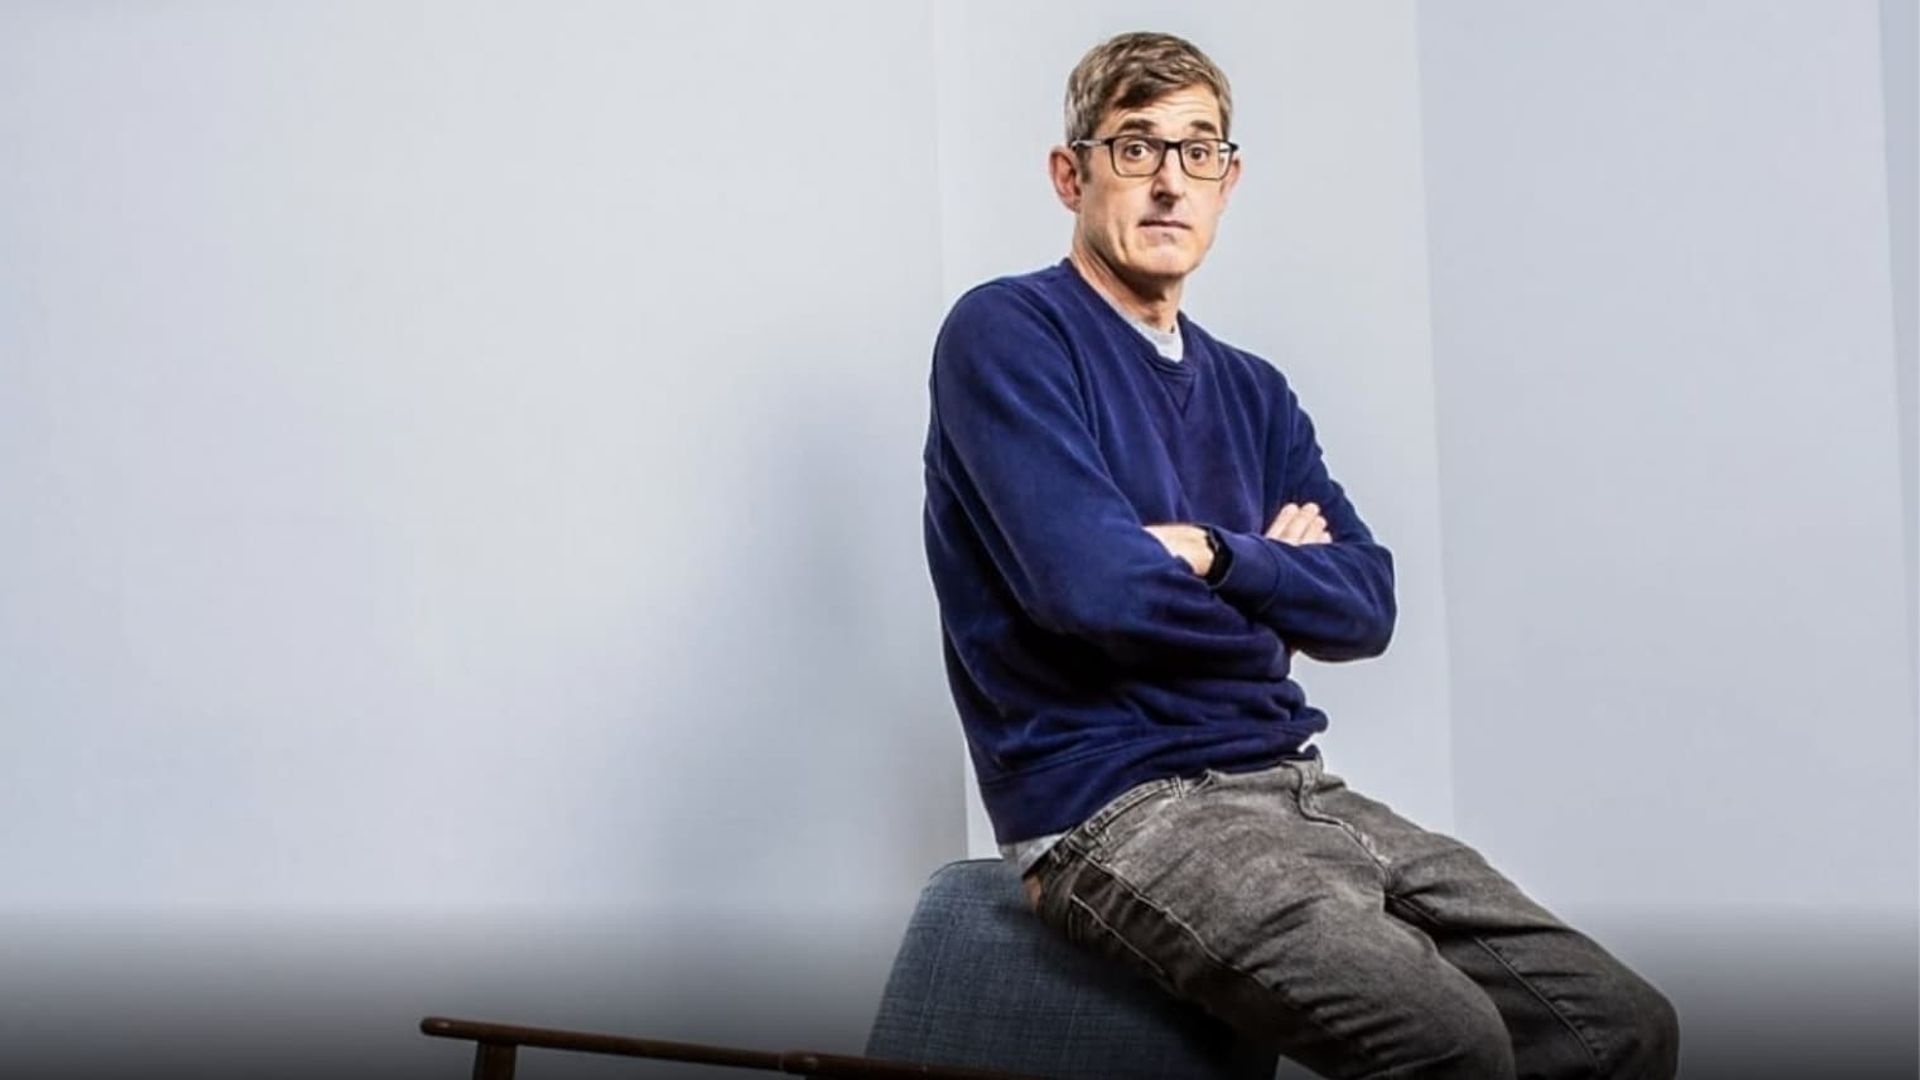 Louis Theroux Interviews... background